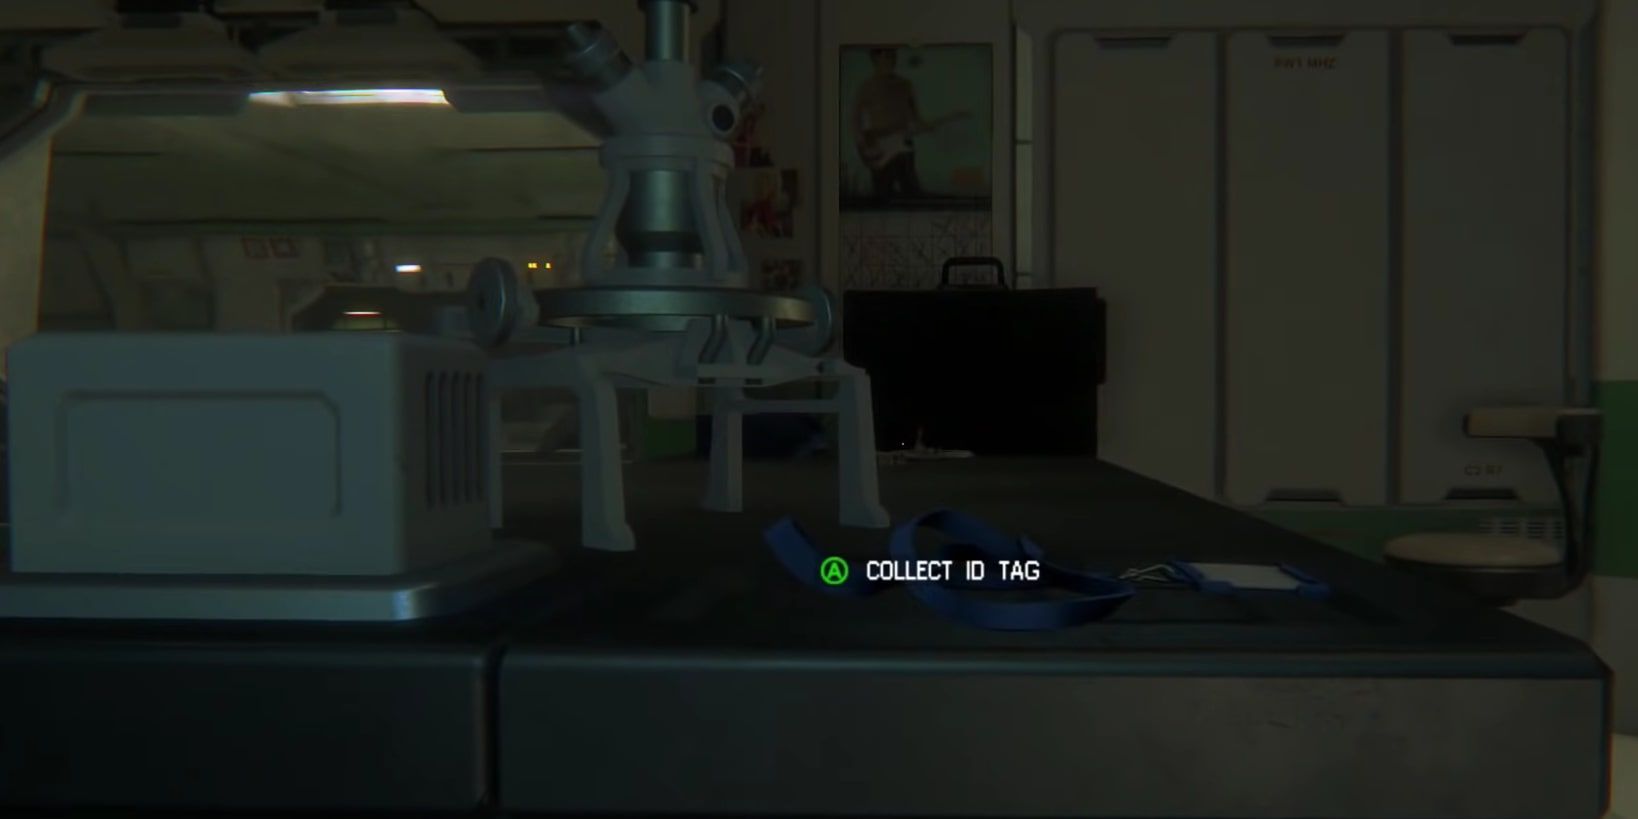 An ID Tag lying on a lab counter in the hospital ward of Alien: Isolation.